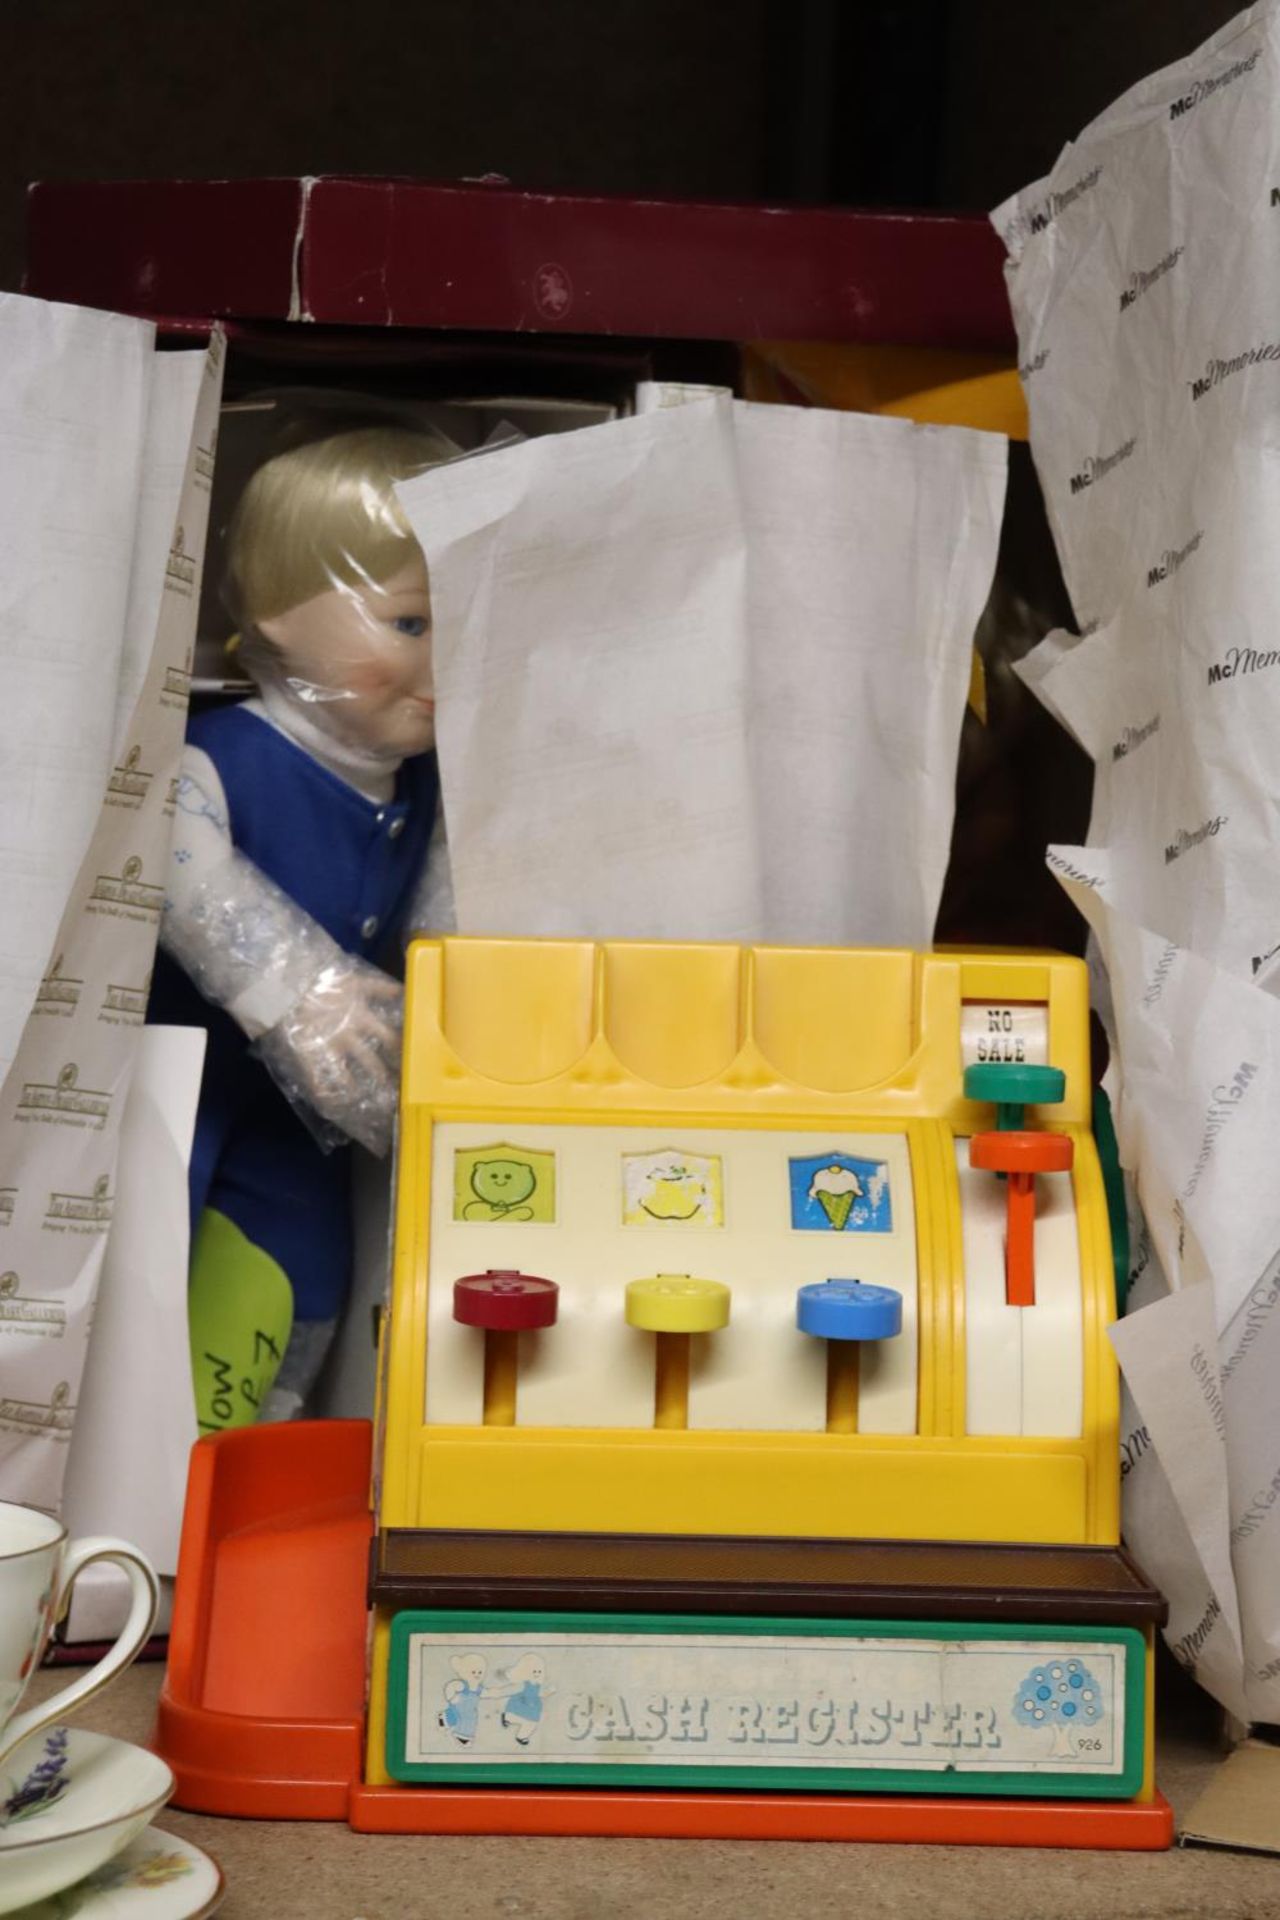 THREE BOXED DOLLS AND A FISHER-PRICE CASH REGISTER - Image 2 of 3